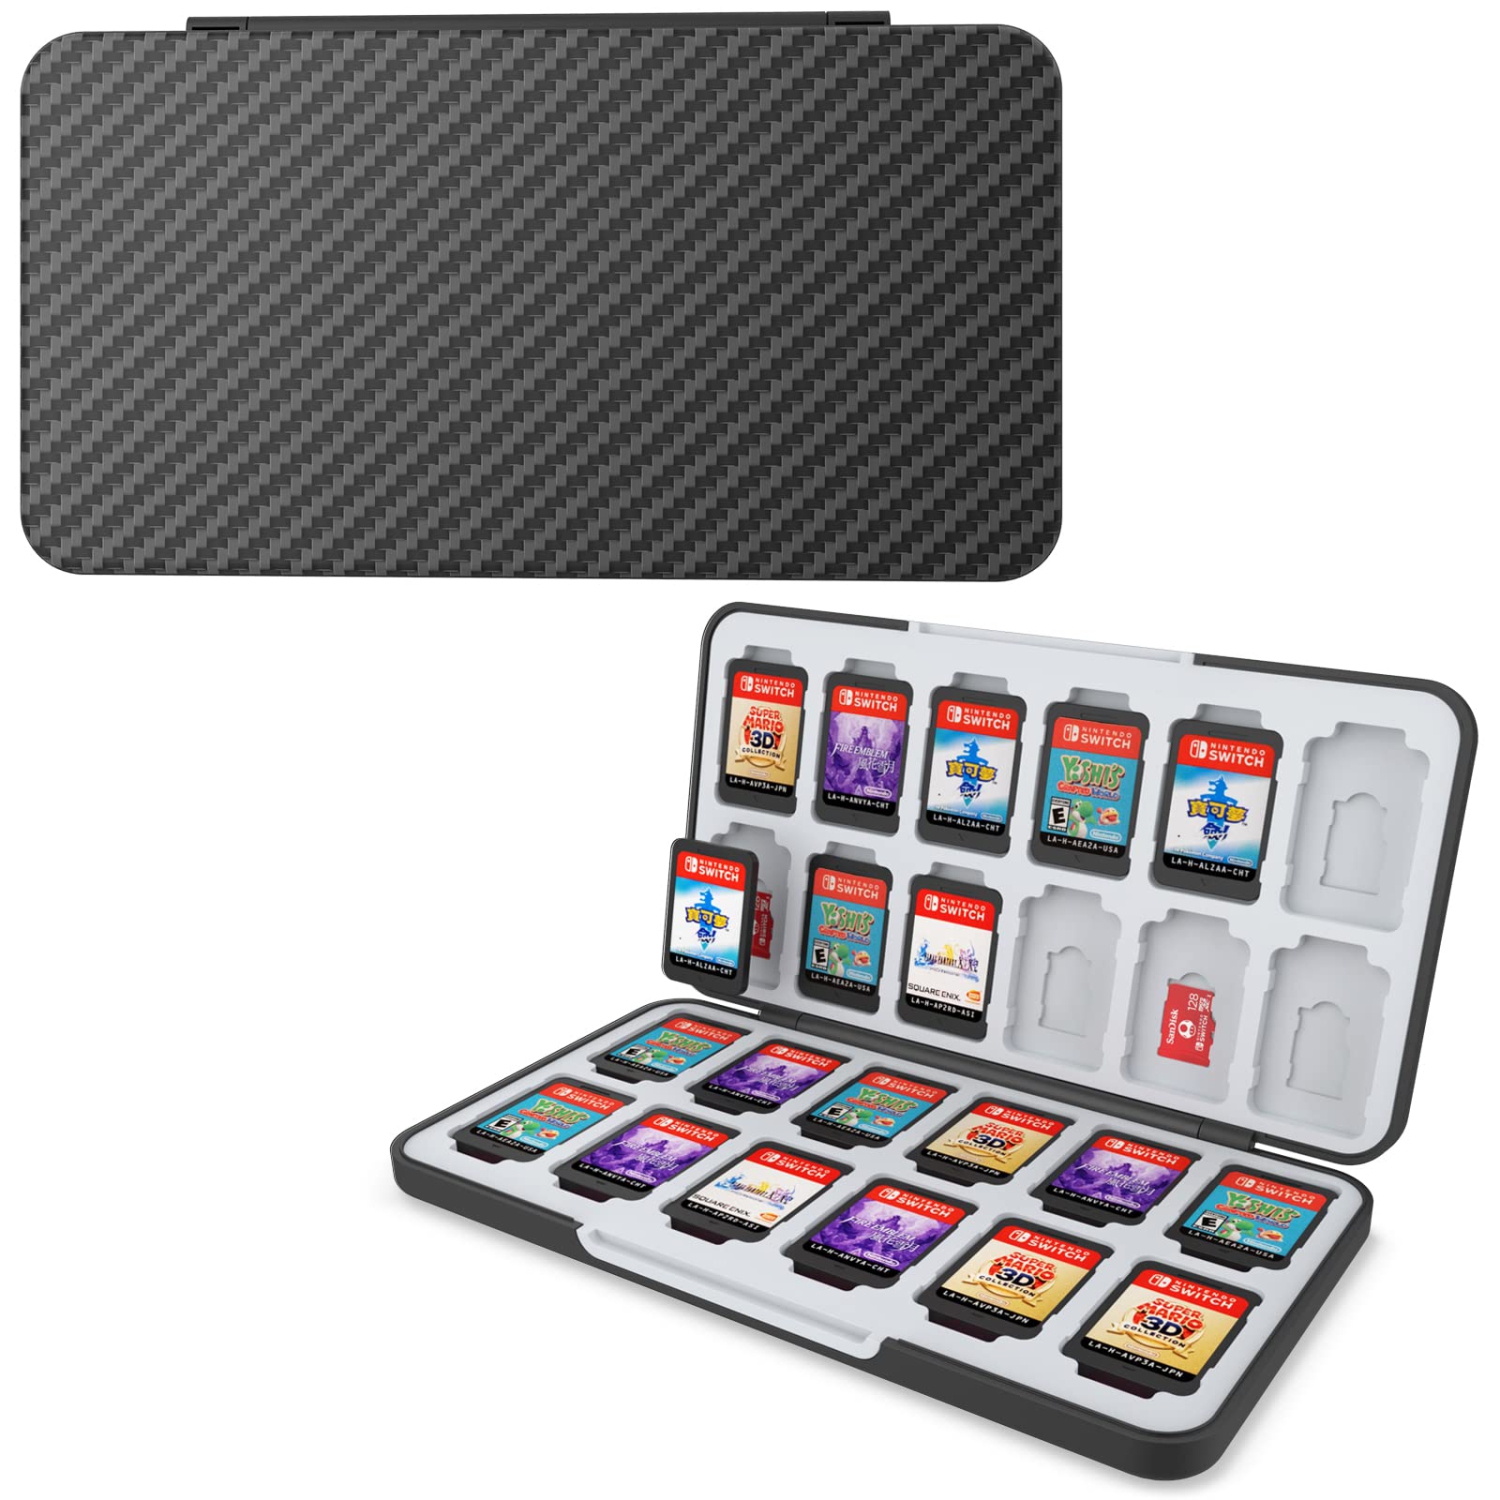 Game Card Case for Nintendo Switch Game Card, Carbon Fibre Surface Processes Design Switch Game Memory Card Storage with 24 Game Card Slots and 24 Micro SD Card Slots.